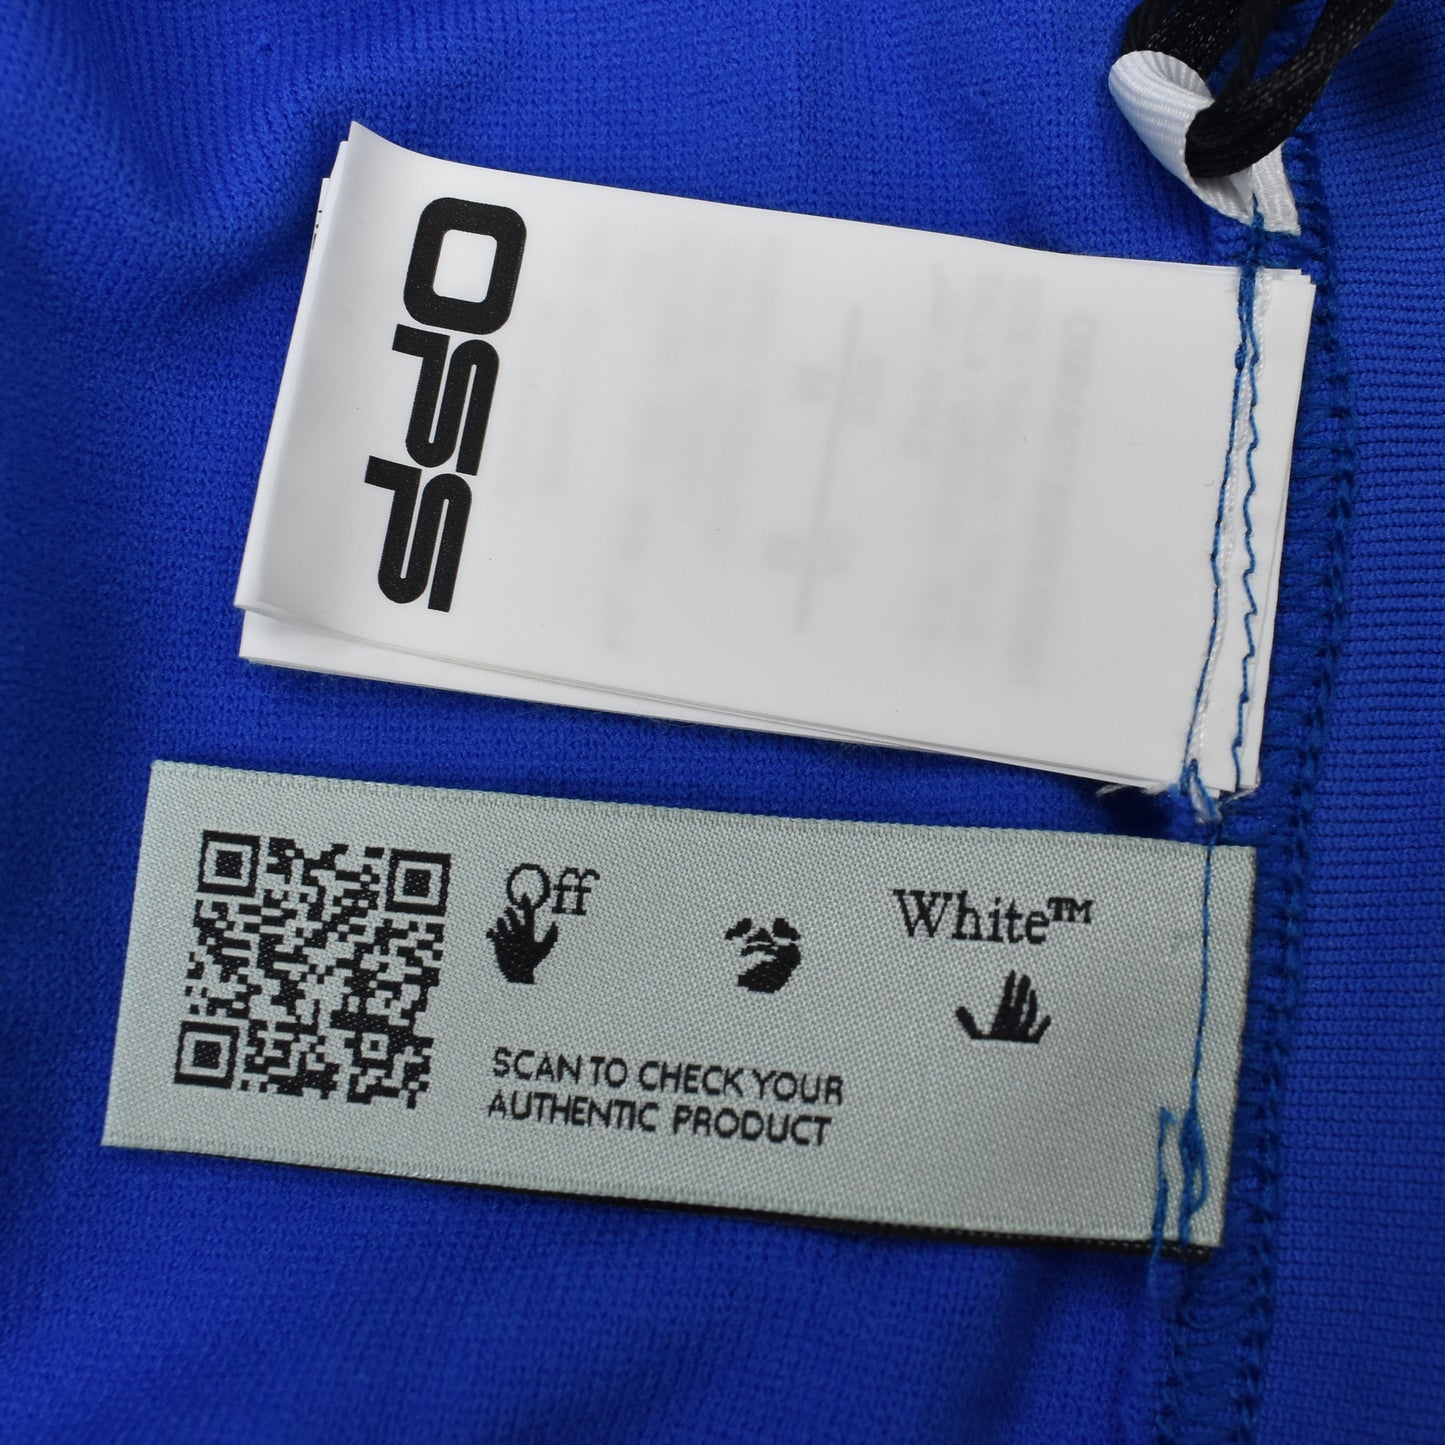 Off-White - Blue Seamless Knit Active T-Shirt